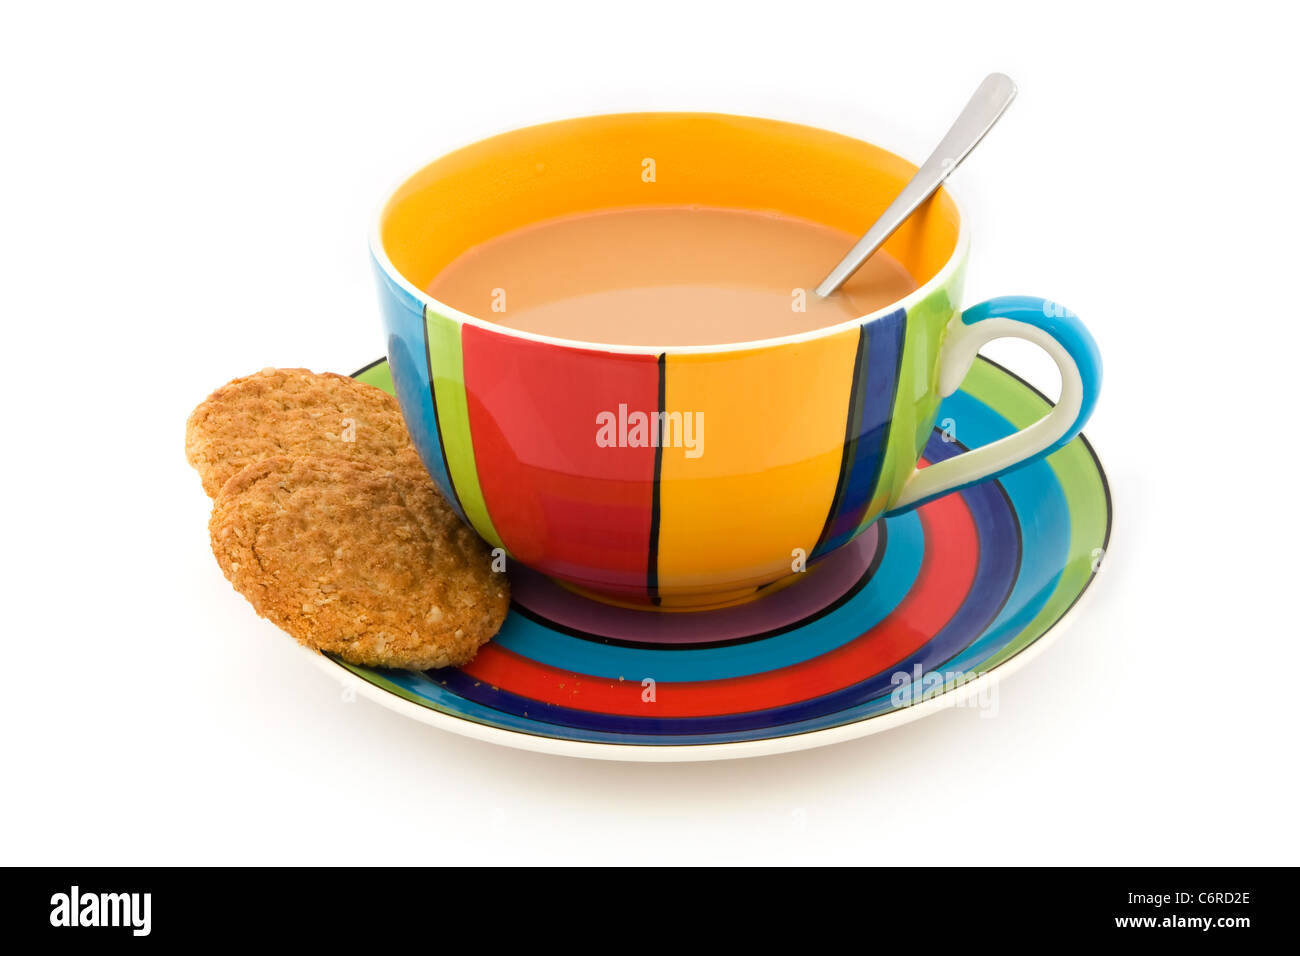 Stripy tasse et soucoupe avec deux biscuits isolated on white Banque D'Images